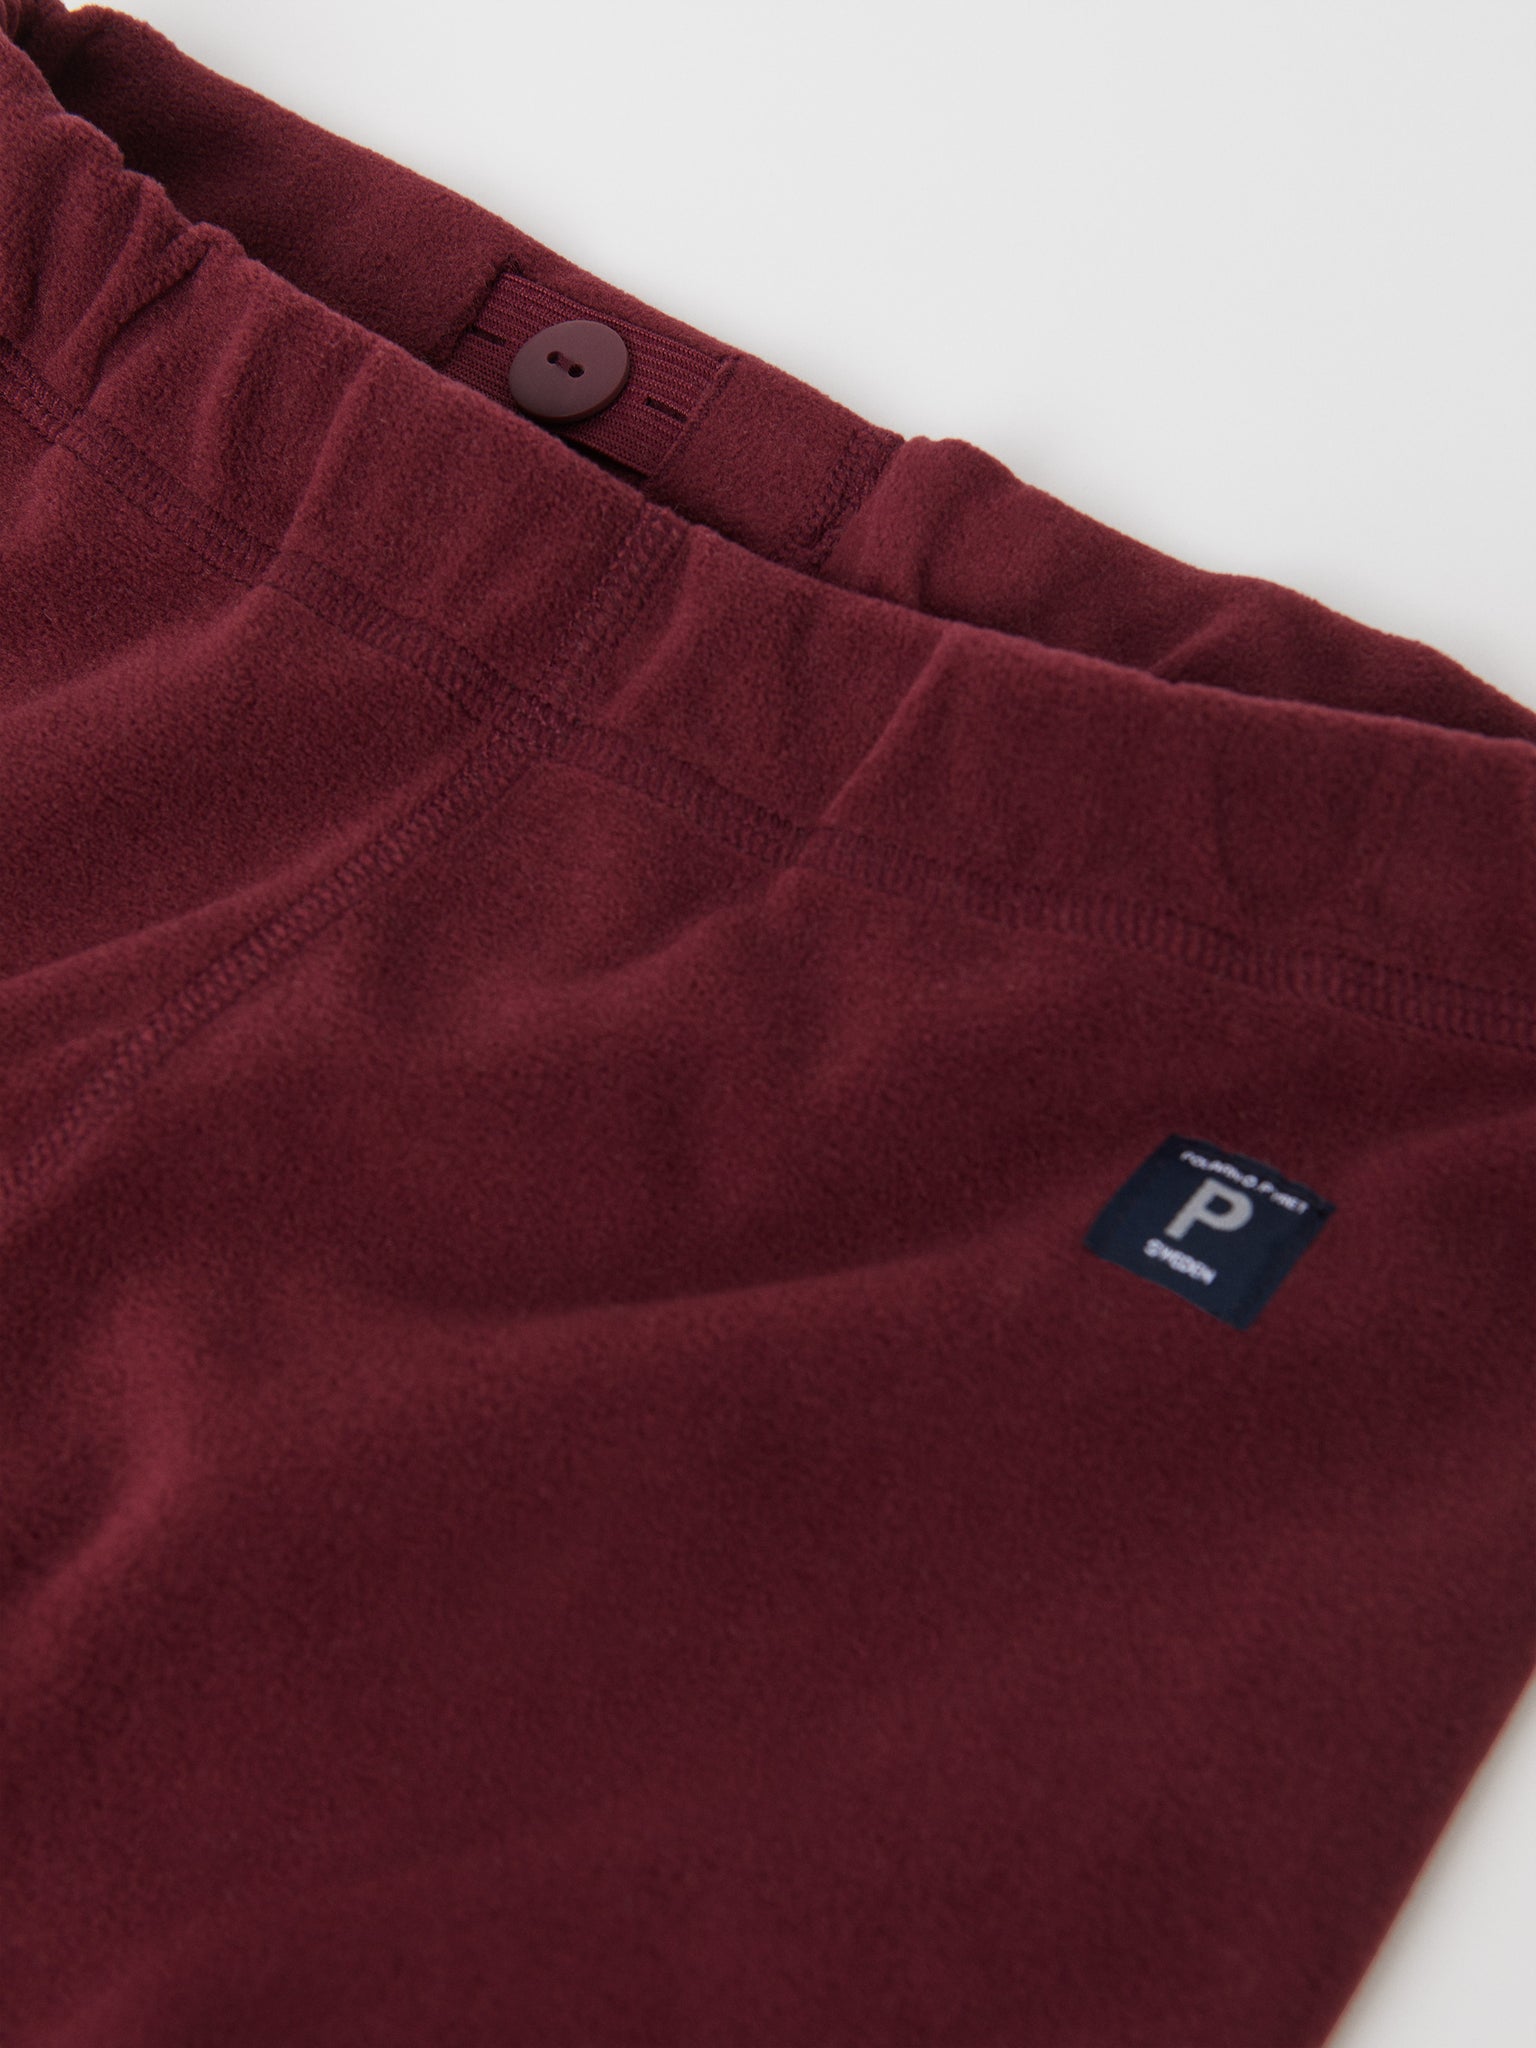 Burgundy Fleece Kids Thermal Trousers from the Polarn O. Pyret outerwear collection. Ethically produced kids outerwear.